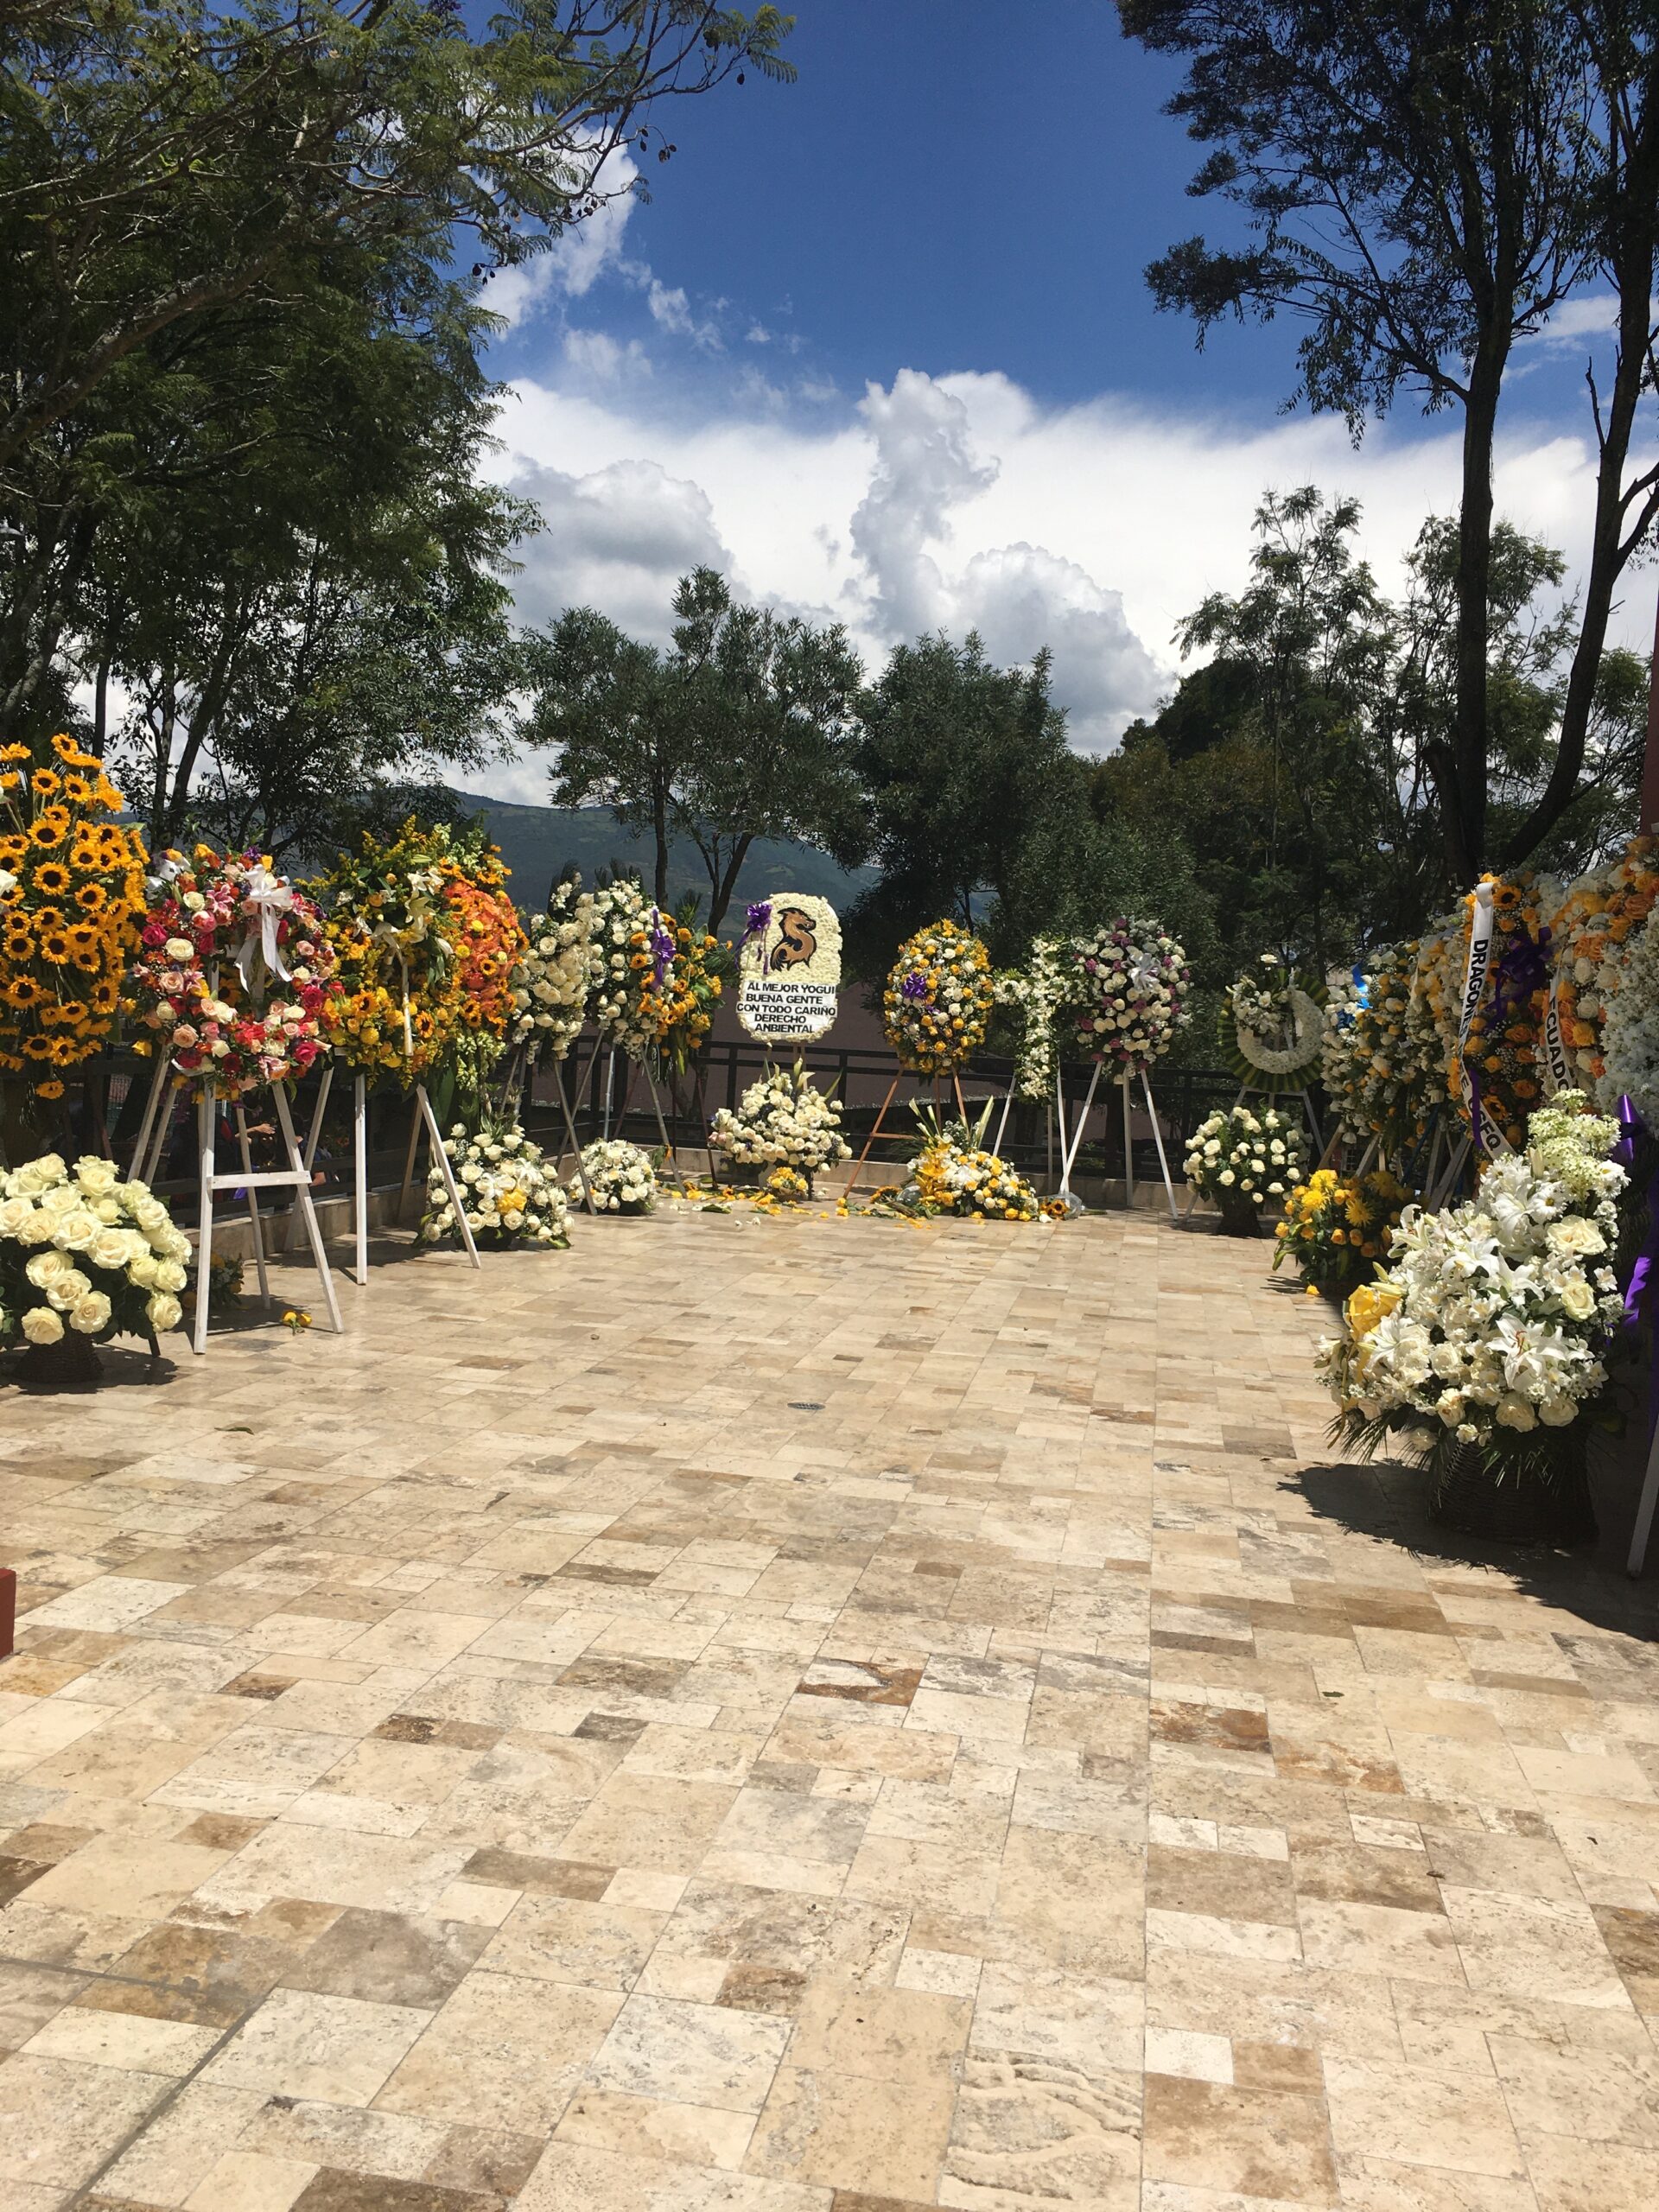 Pictured is a memorial for Santiago. In the picture, there are many flower wreaths and crosses propped together to create a closed-off section for viewing. 